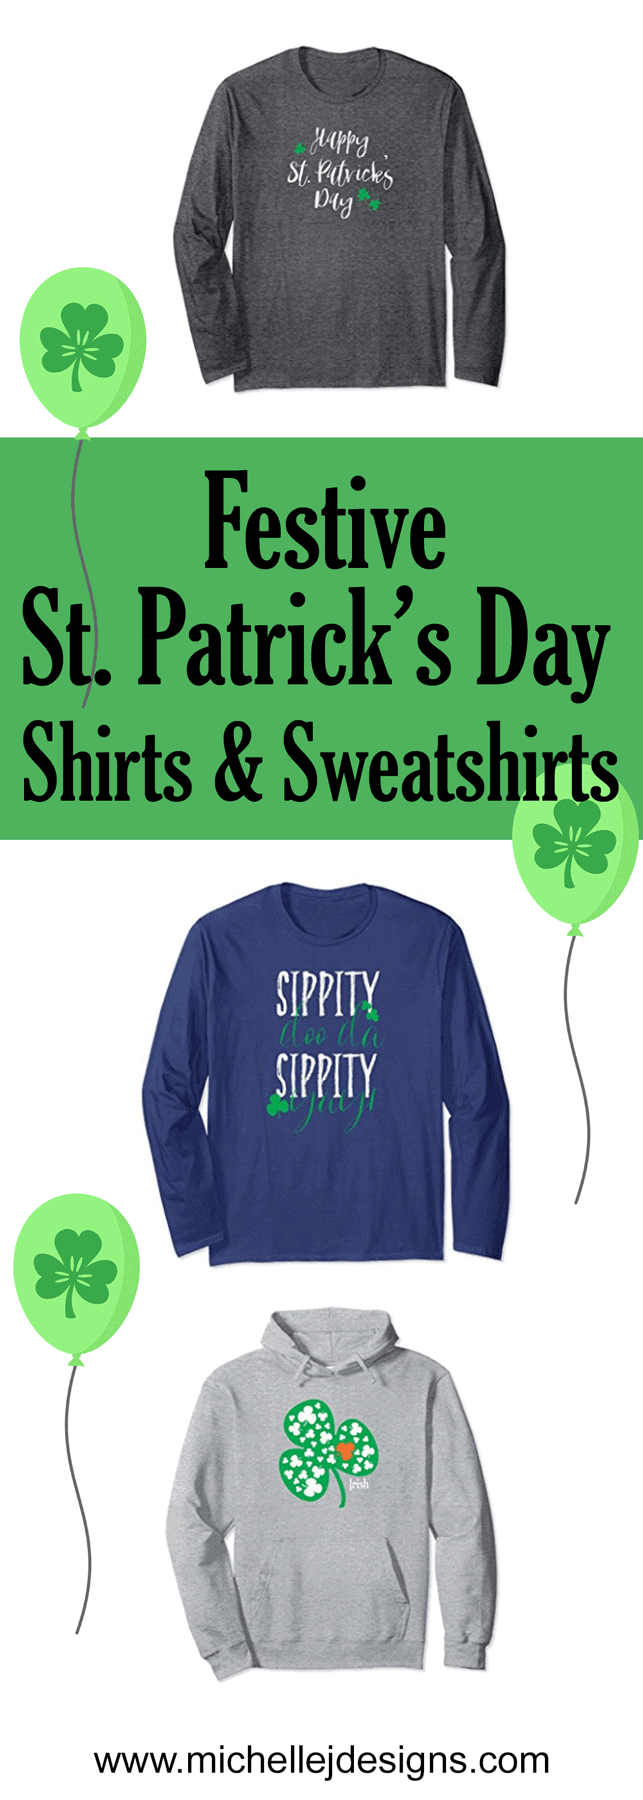 Are you looking for a festive St. Patrick's Day shirt for the day or the celebration? These are some of my newest designs that I love! There are some just for camping lovers too! - #stpatricksdayshirts #stpatricksday #stpats #stpatsshirts -www.michellejdesigns.com